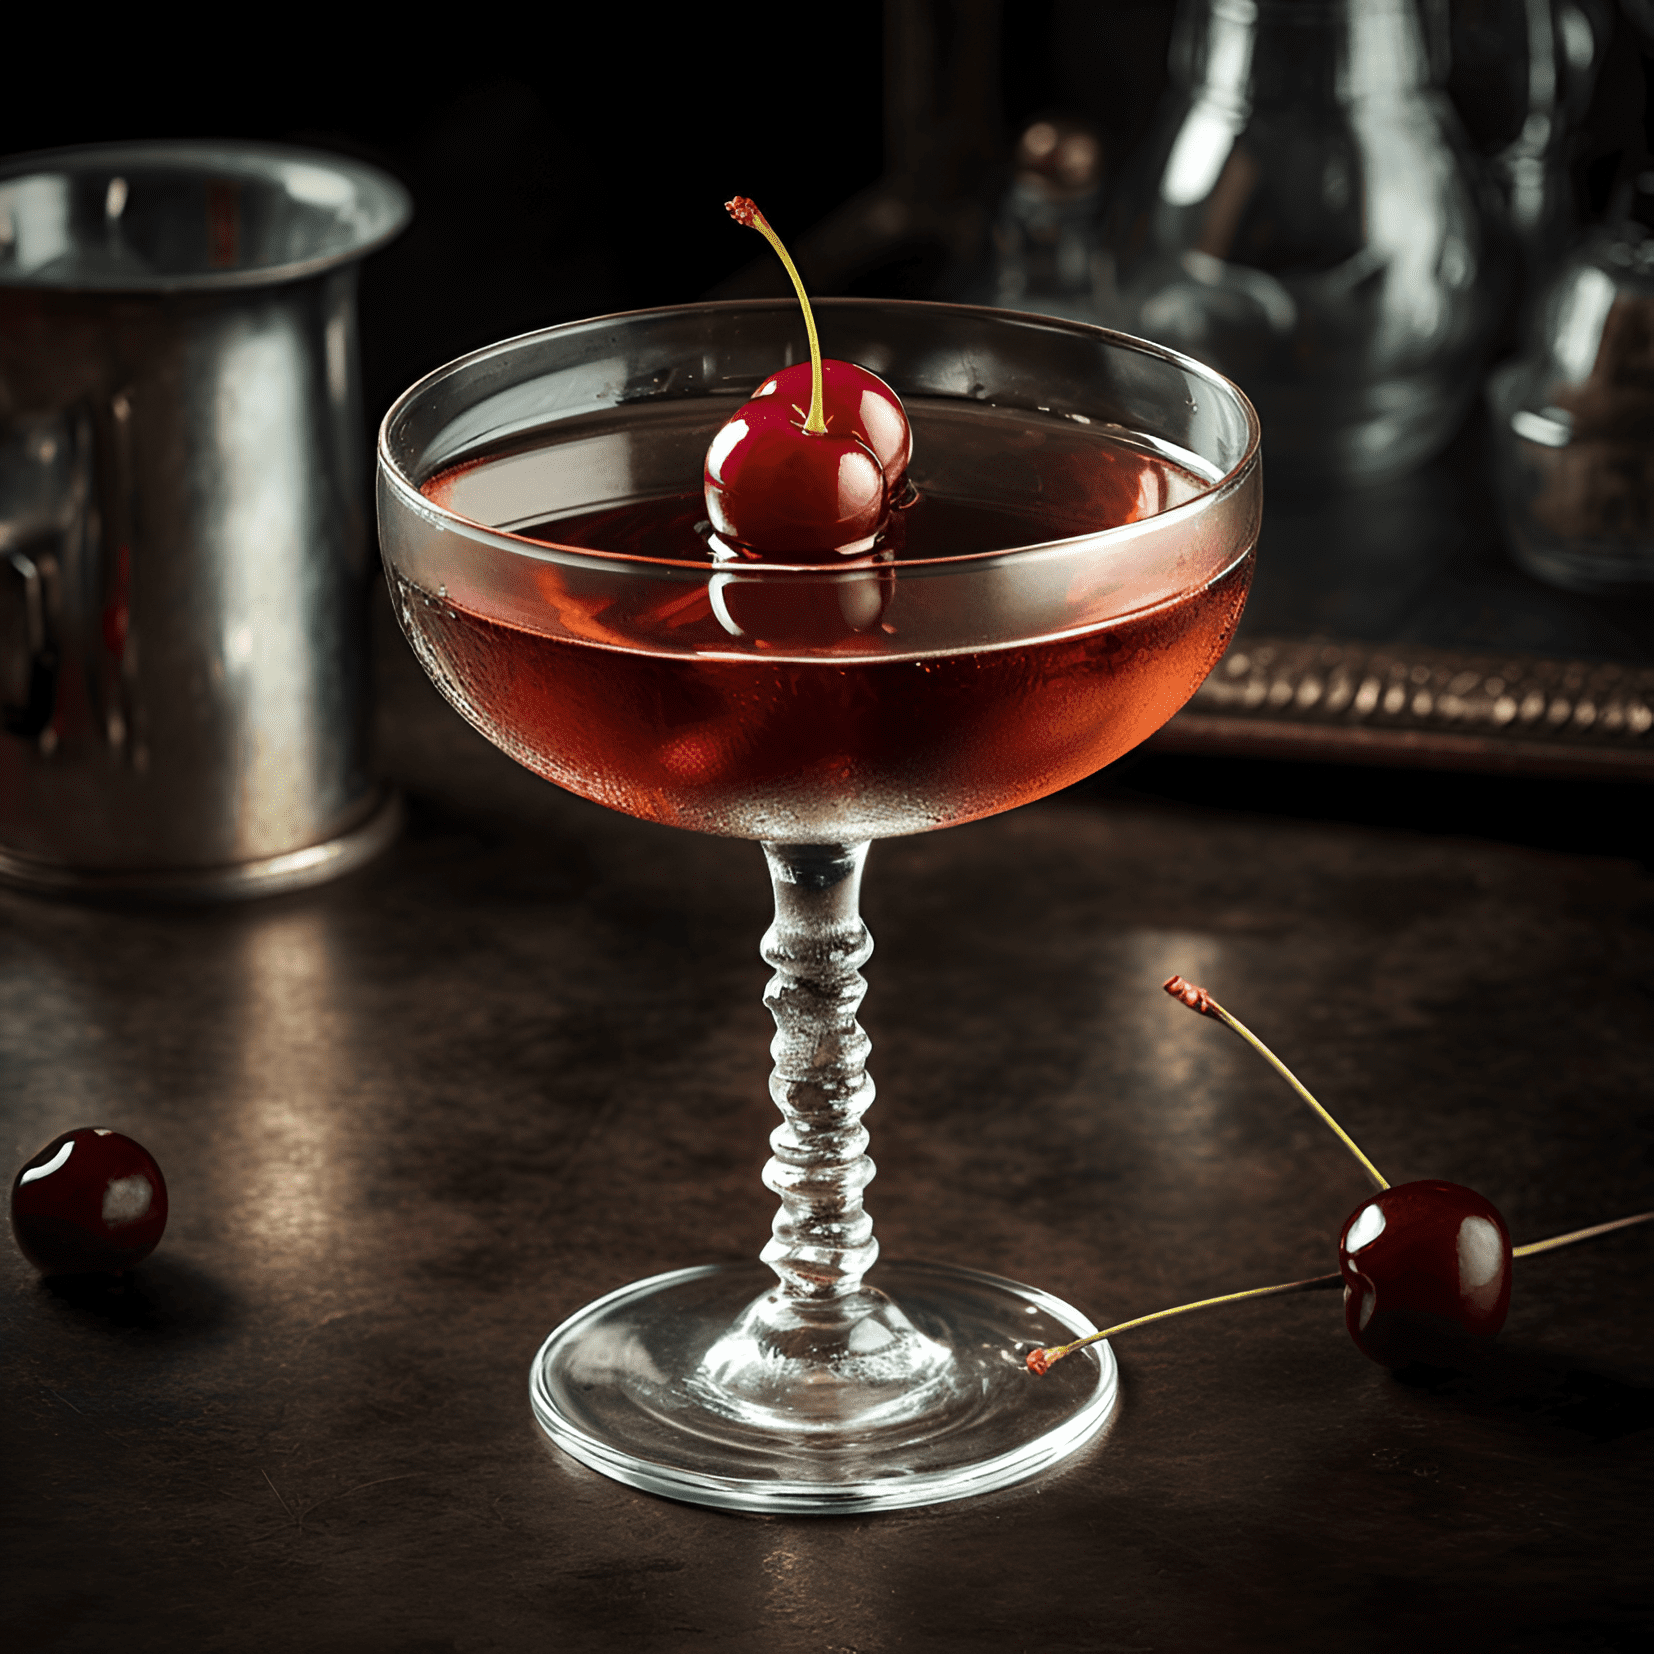 The Midnight cocktail offers a harmonious blend of sweet, sour, and slightly bitter flavors. It has a rich and velvety texture, with a warming sensation from the alcohol. The taste is complex, yet well-balanced, making it a delightful and intriguing drink.